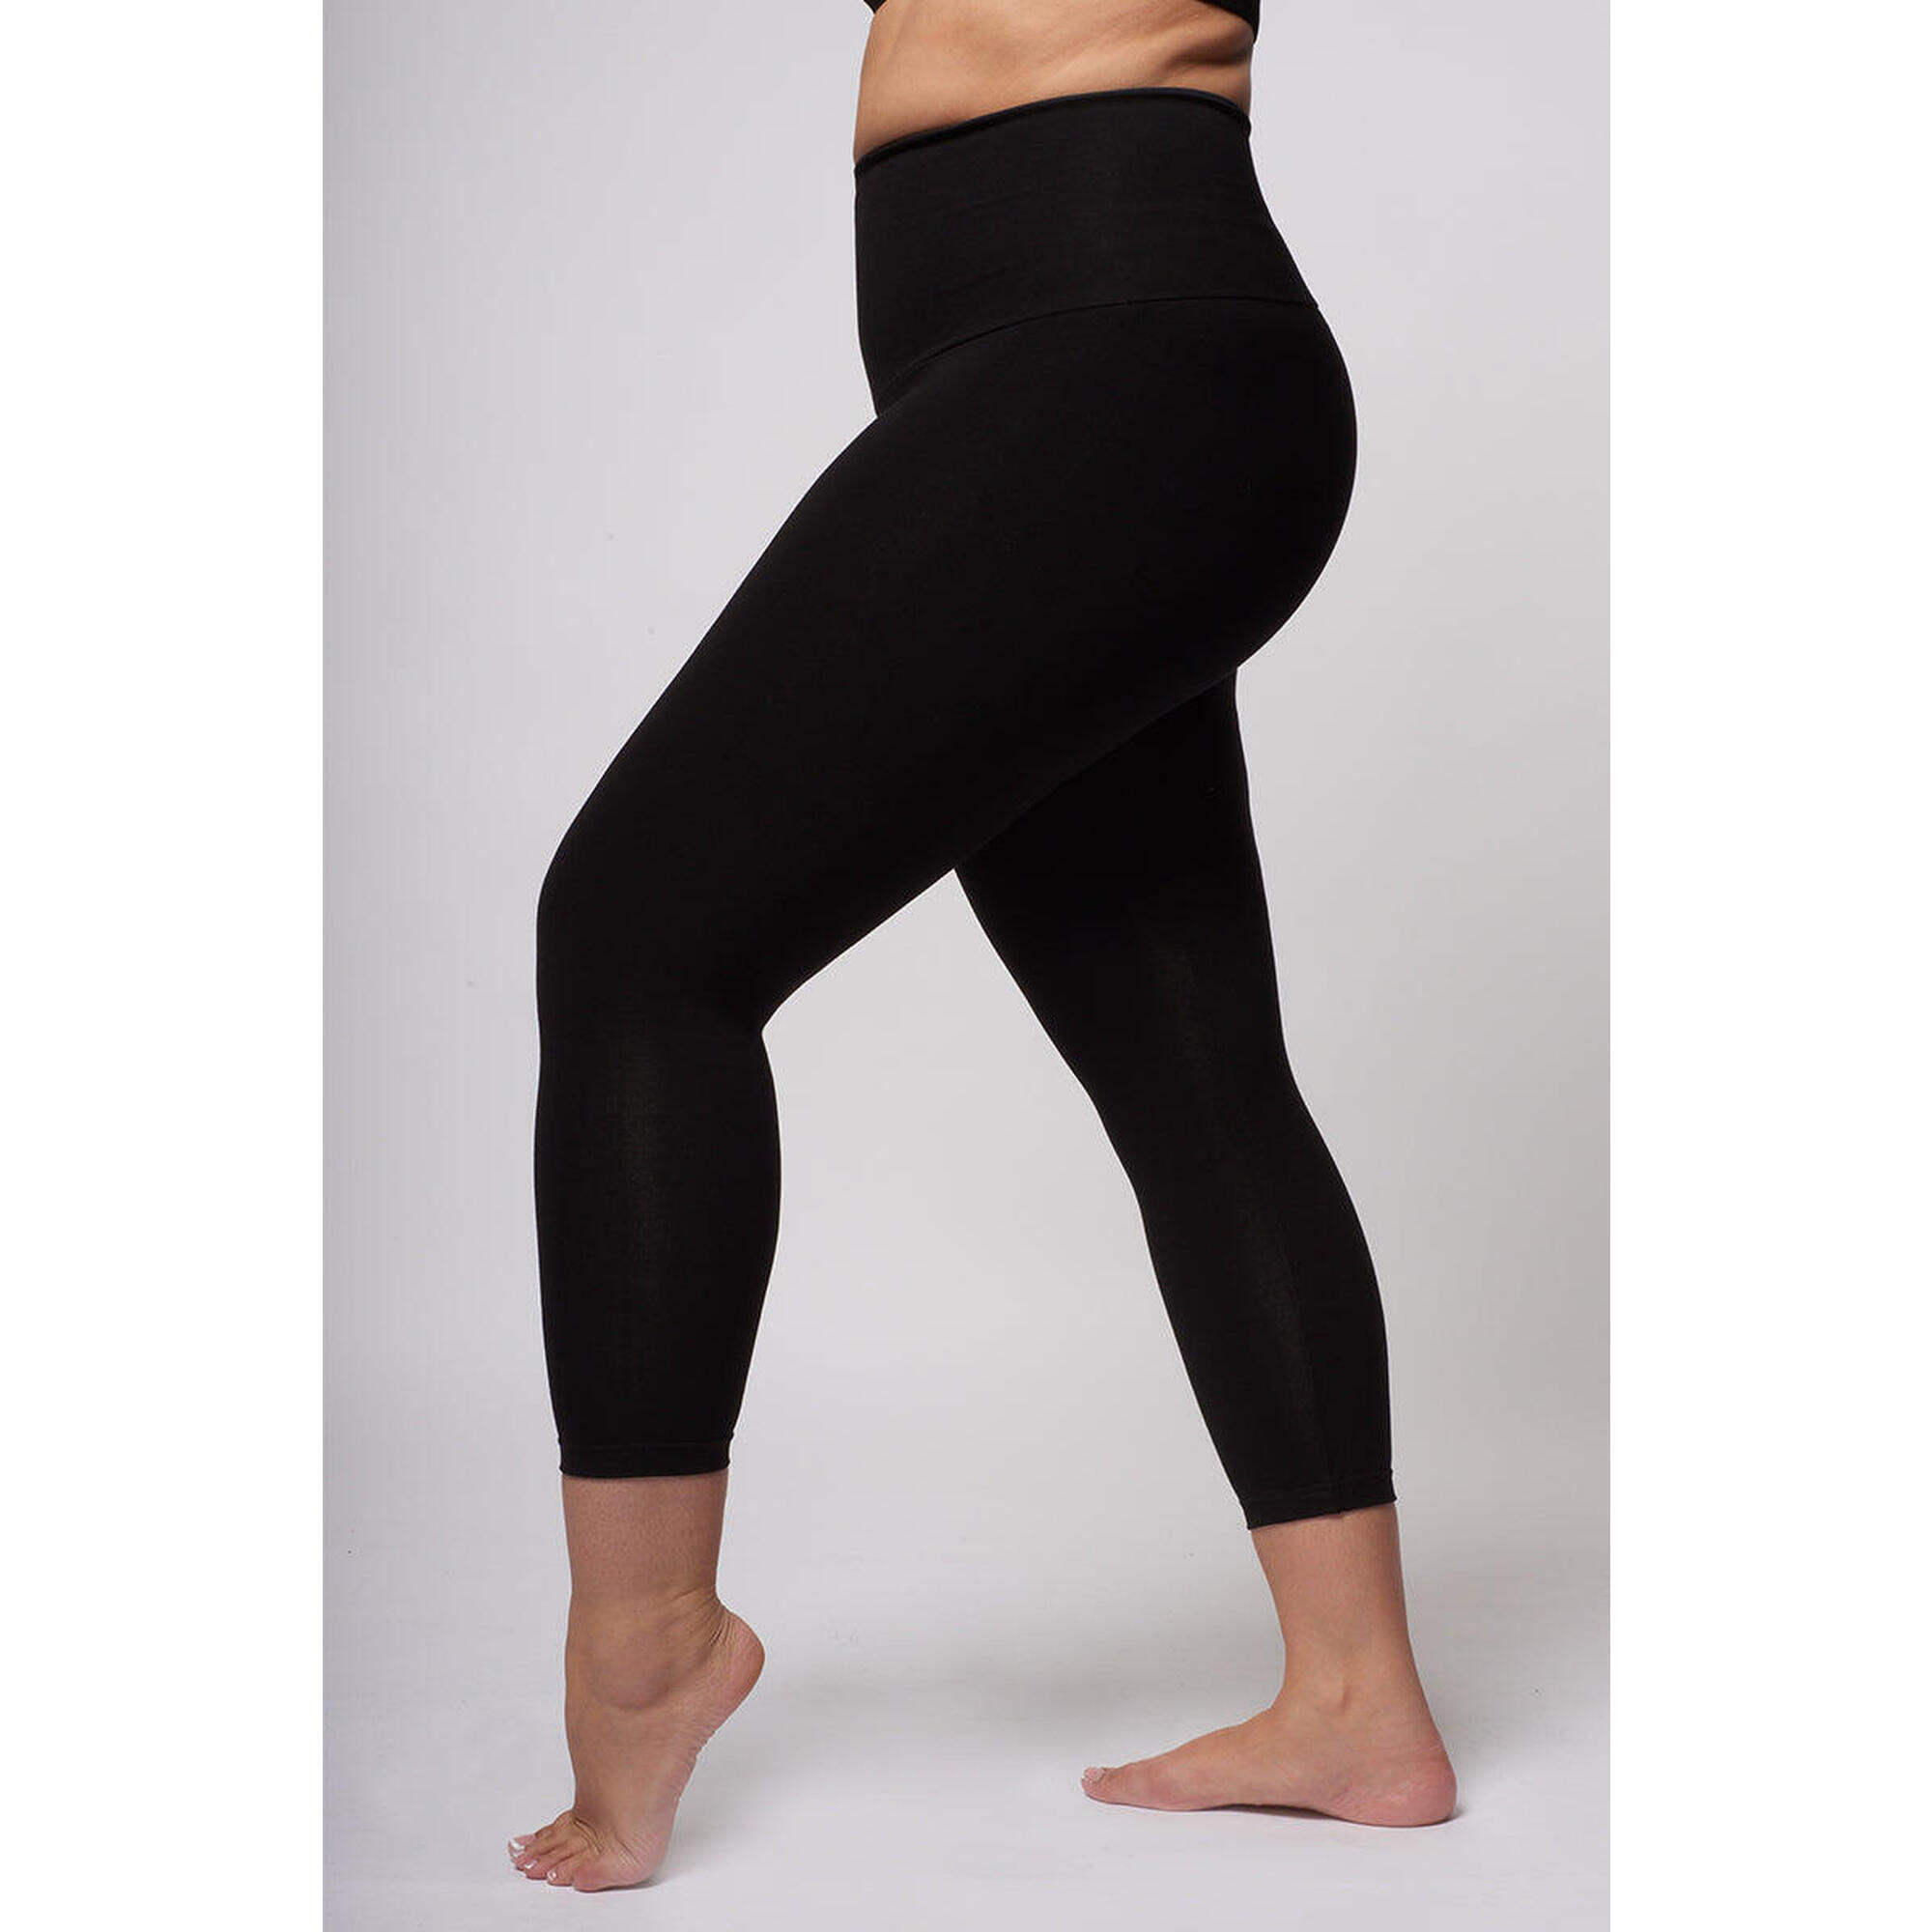 TLC SPORT Extra Strong Compression Curve Cropped Leggings with Waisted Tummy Control Black